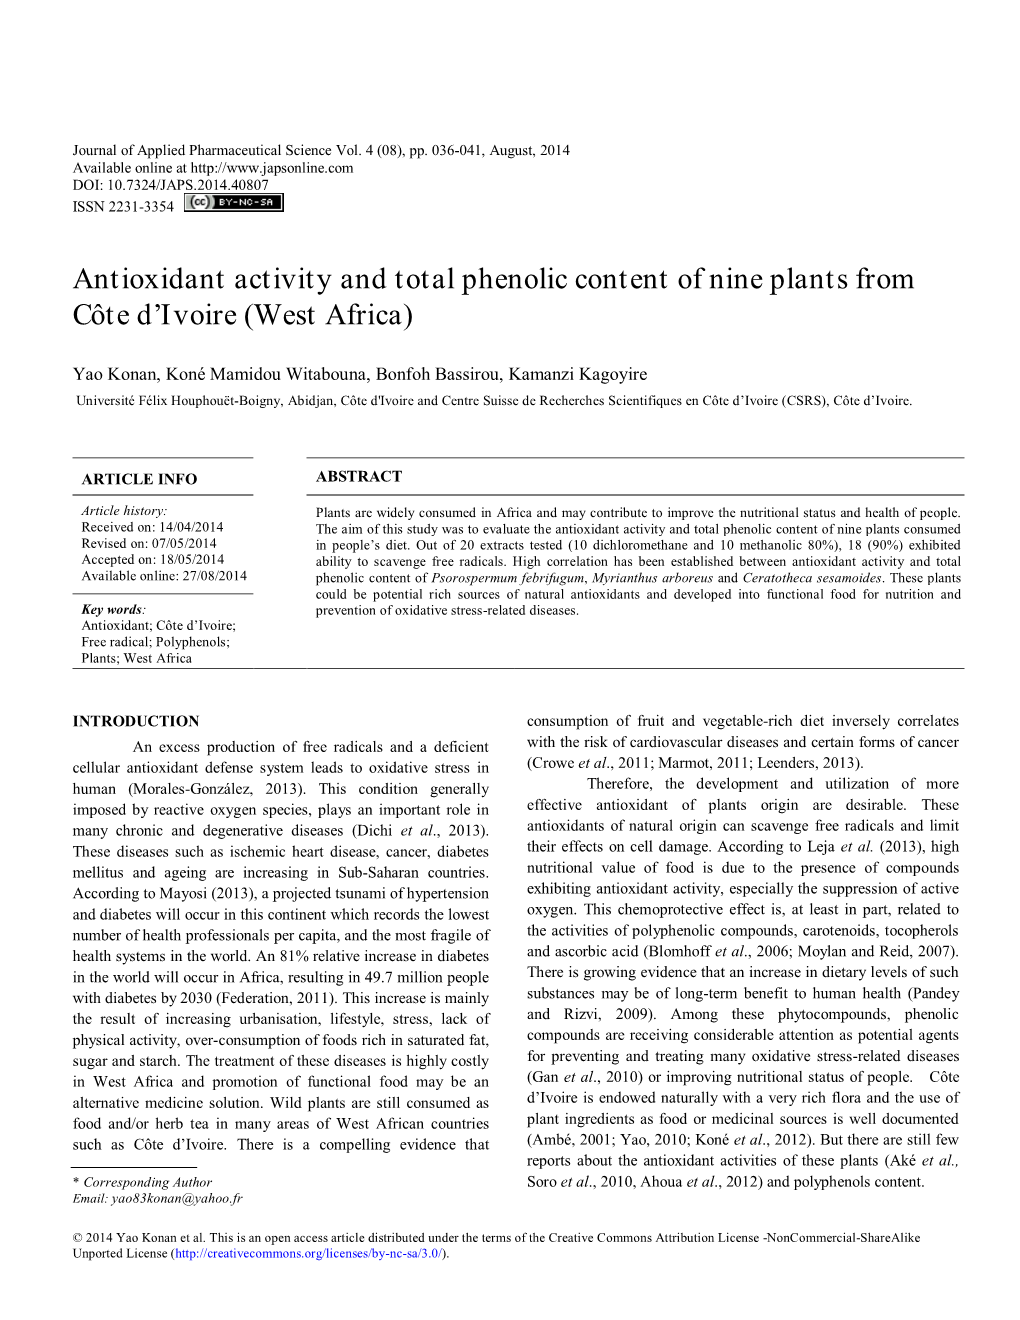 Antioxidant Activity and Total Phenolic Content of Nine Plants from Côte D’Ivoire (West Africa)